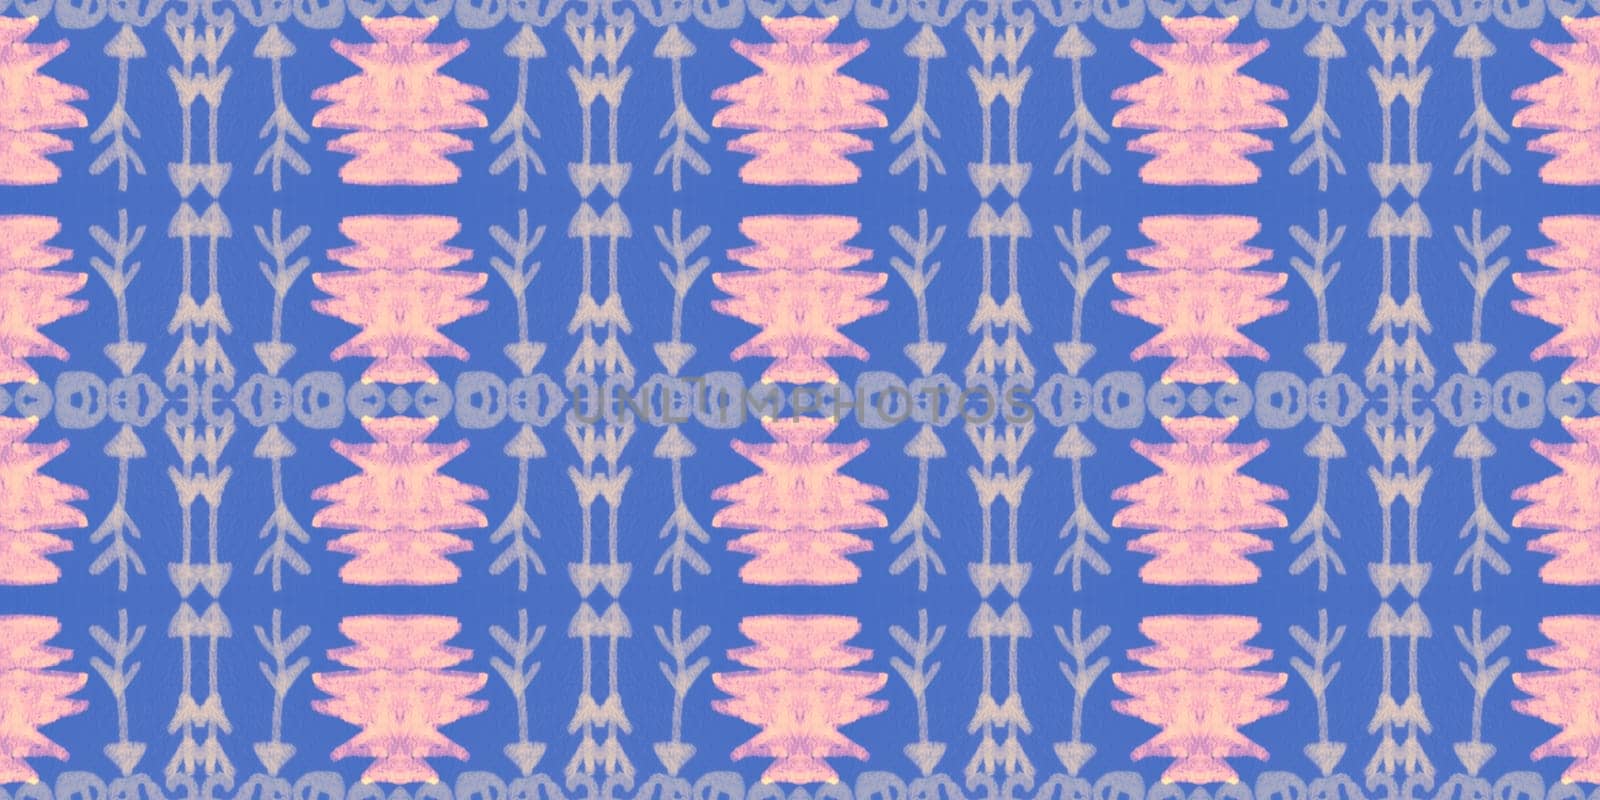 Geometric ethnic pattern. Mexican motif design. Vintage american background. Traditional native indian texture. Seamless ethnic pattern. Art maya illustration. Abstract tribal ornament.